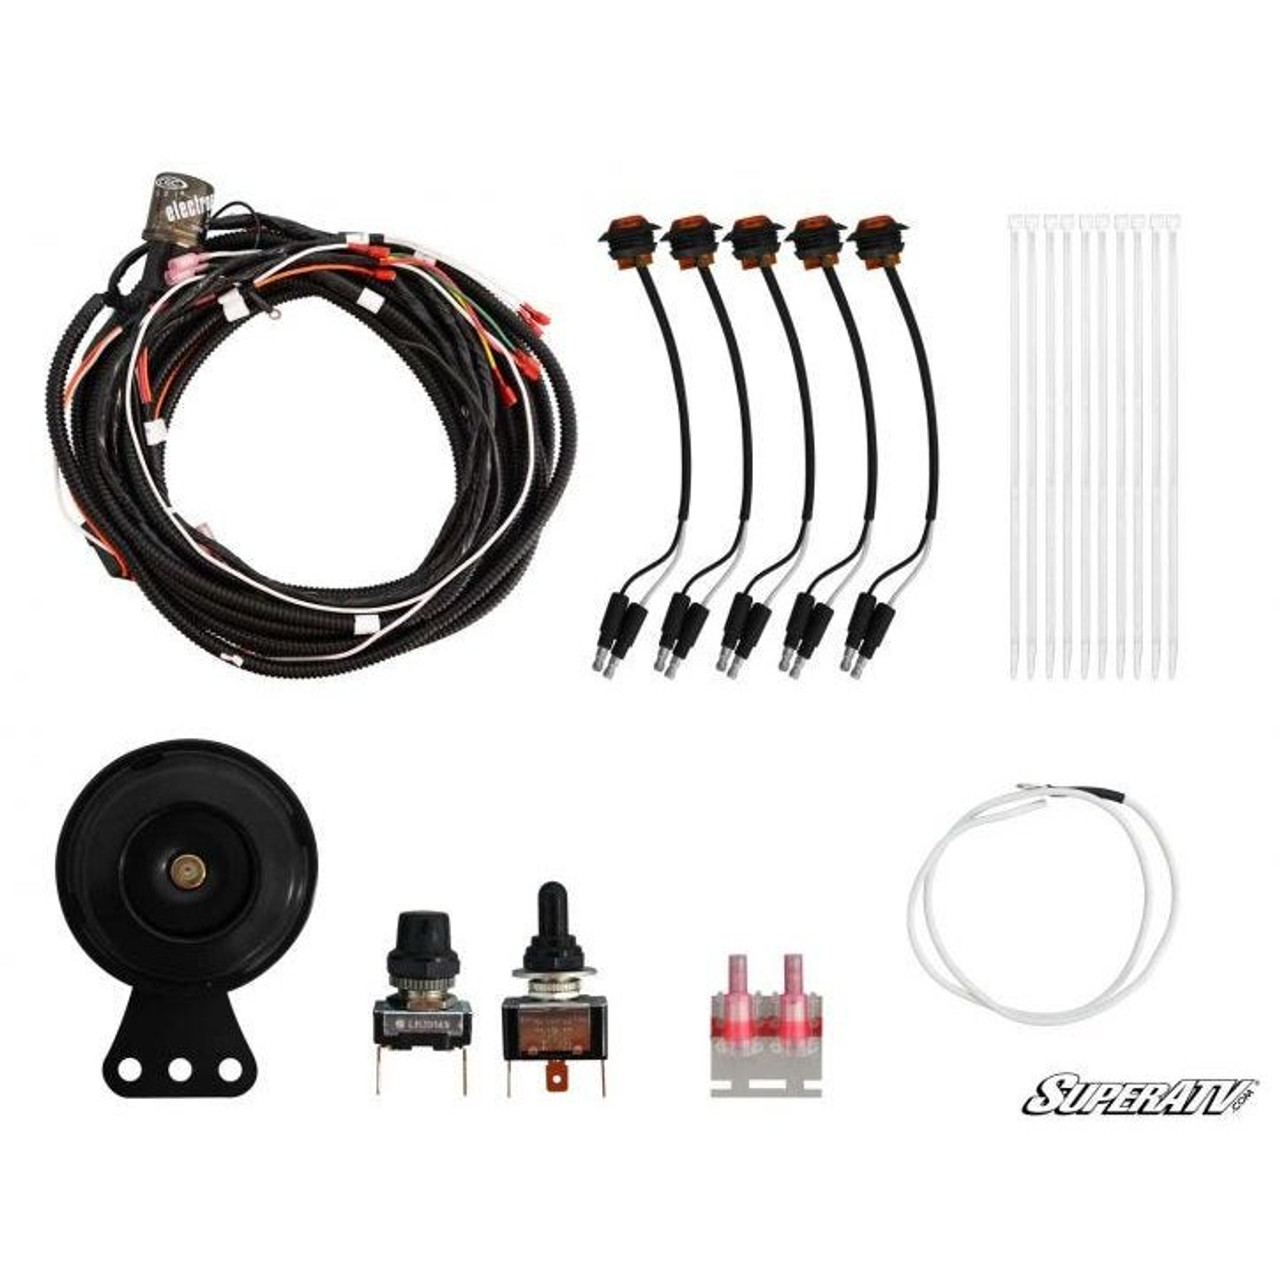 Turn signal kit installation atv Etequipements, installation kit clignotant  pour vtt ou side by side 